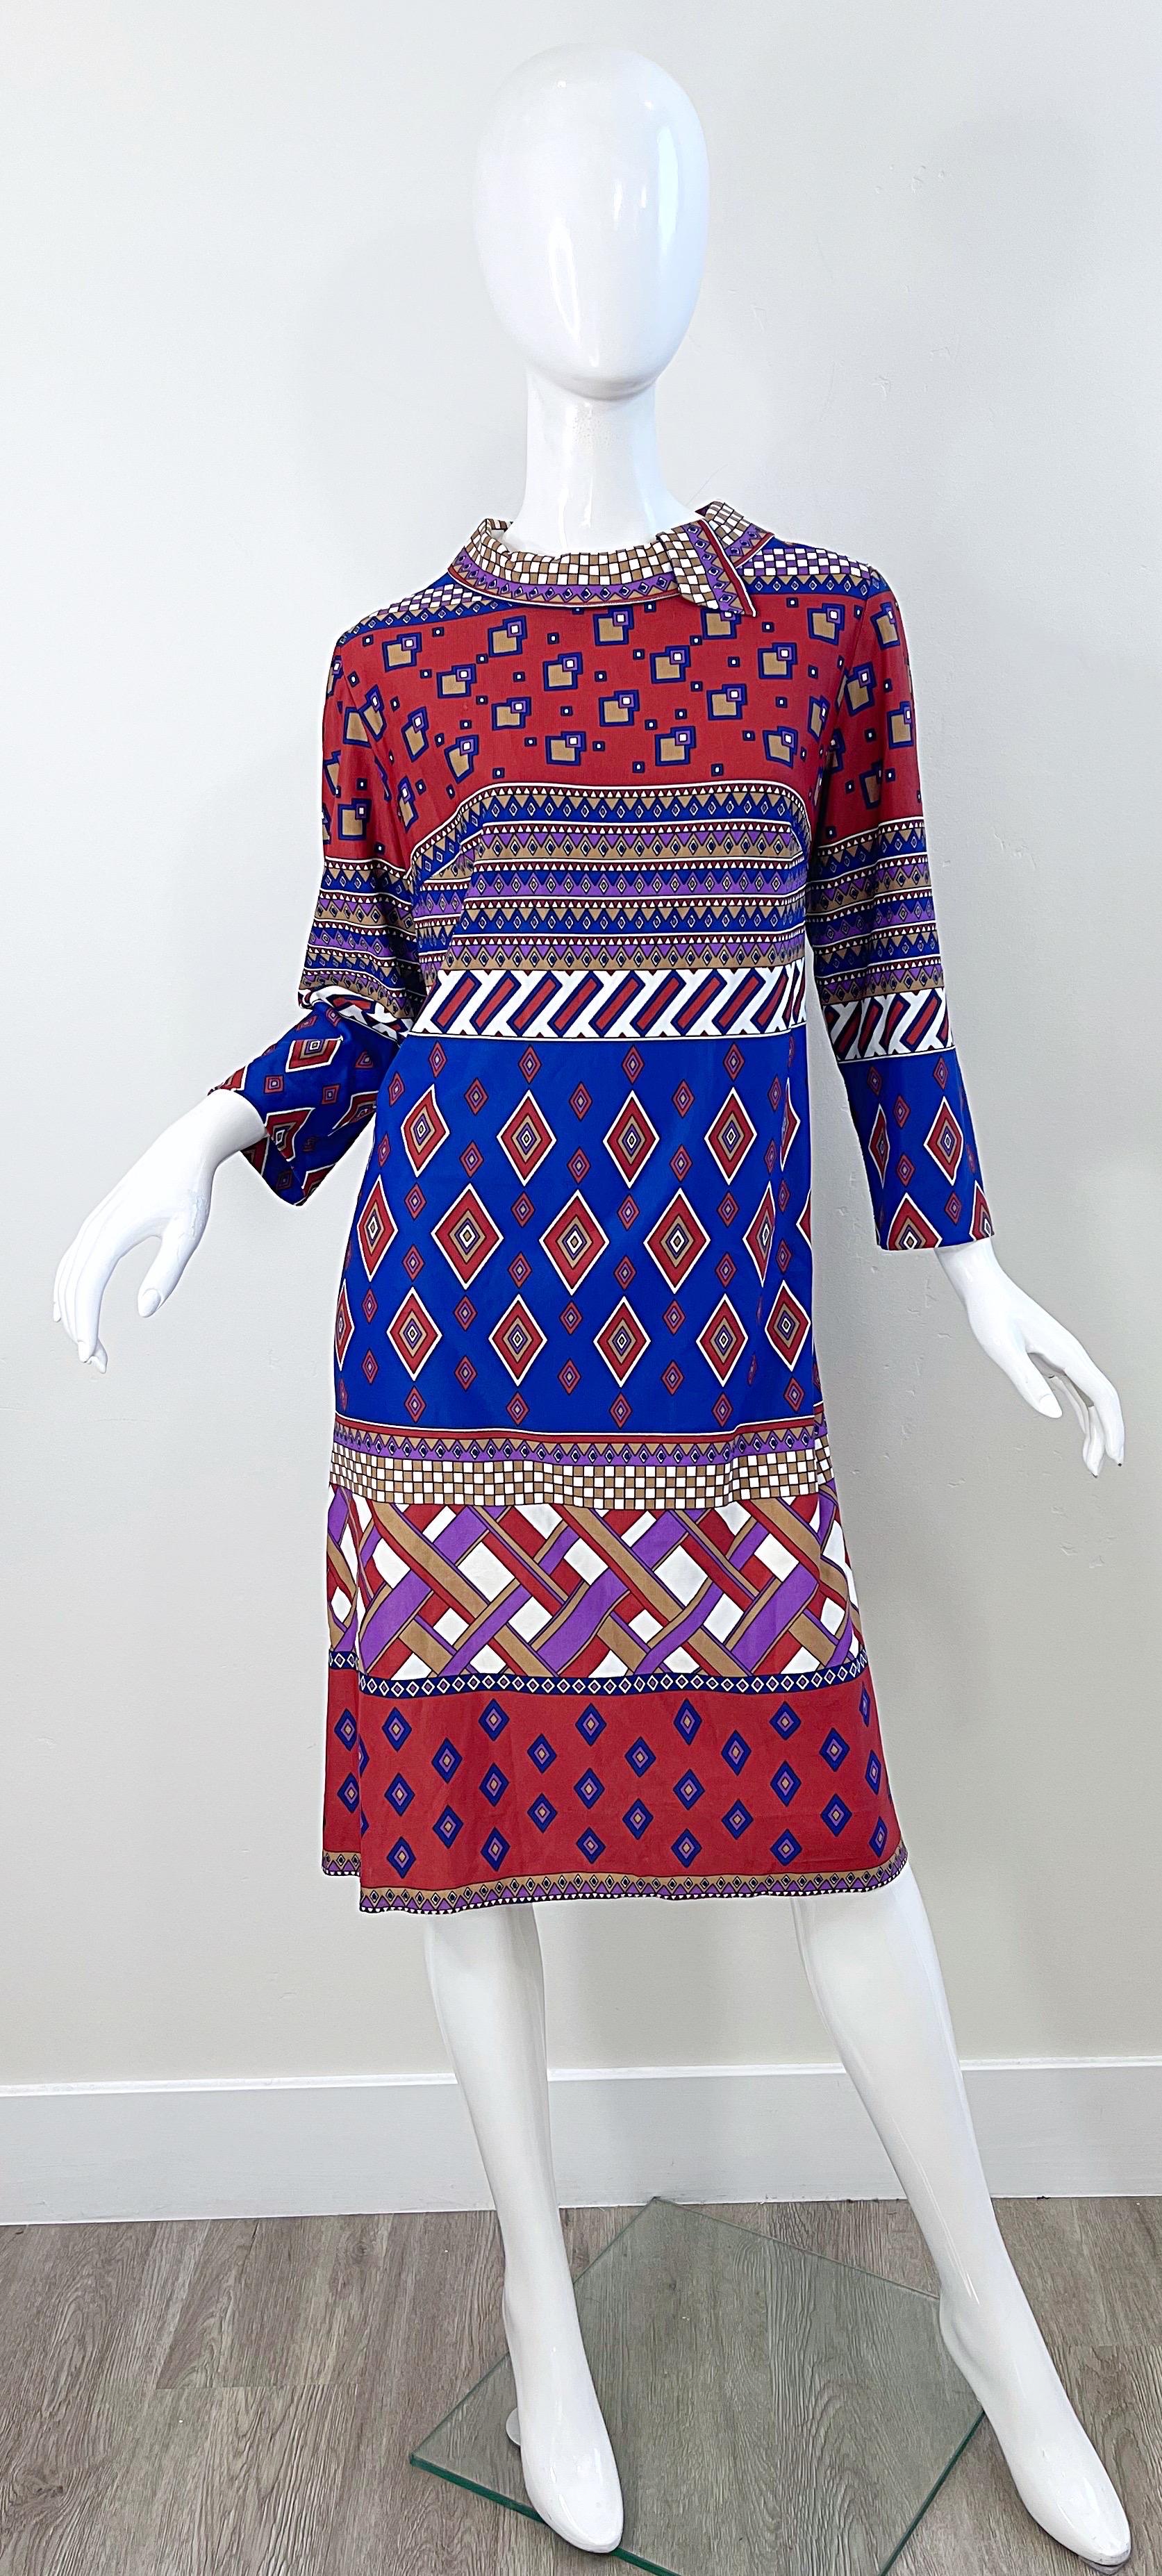 Amazing 1960s AMY ADAMS for B. ALTMAN abstract print knit dress ! Features warm colors of brown, blue, burnt orange, and purple throughout. Abstract squares, diamonds, rectangles and stripes. Hidden zipper up the back with hook-and-eye closure. 
Can